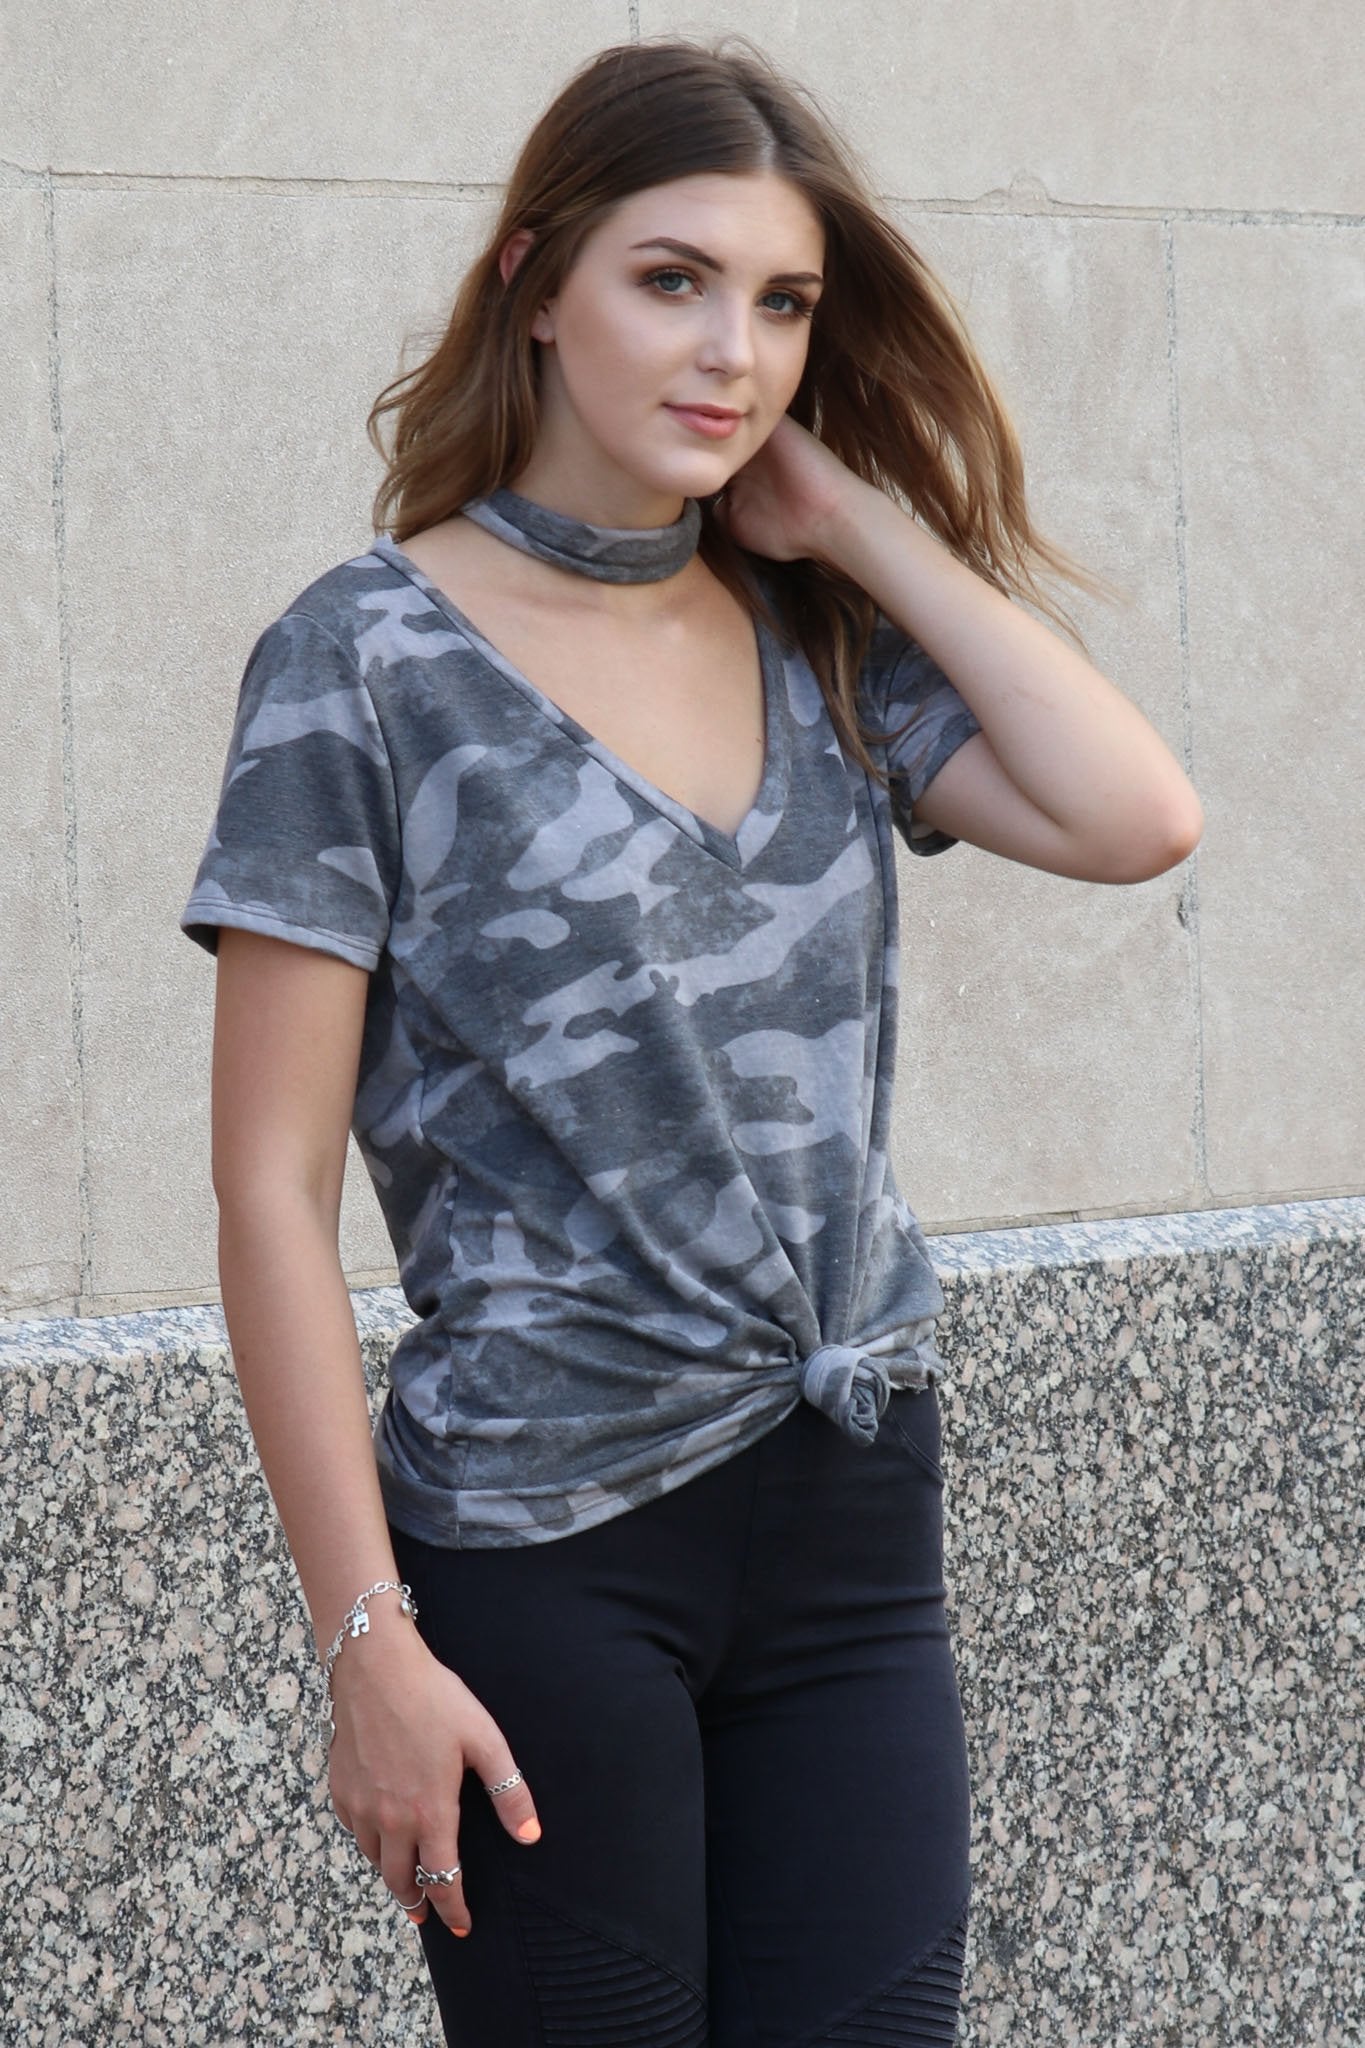 "Blend In Style" Camo Top